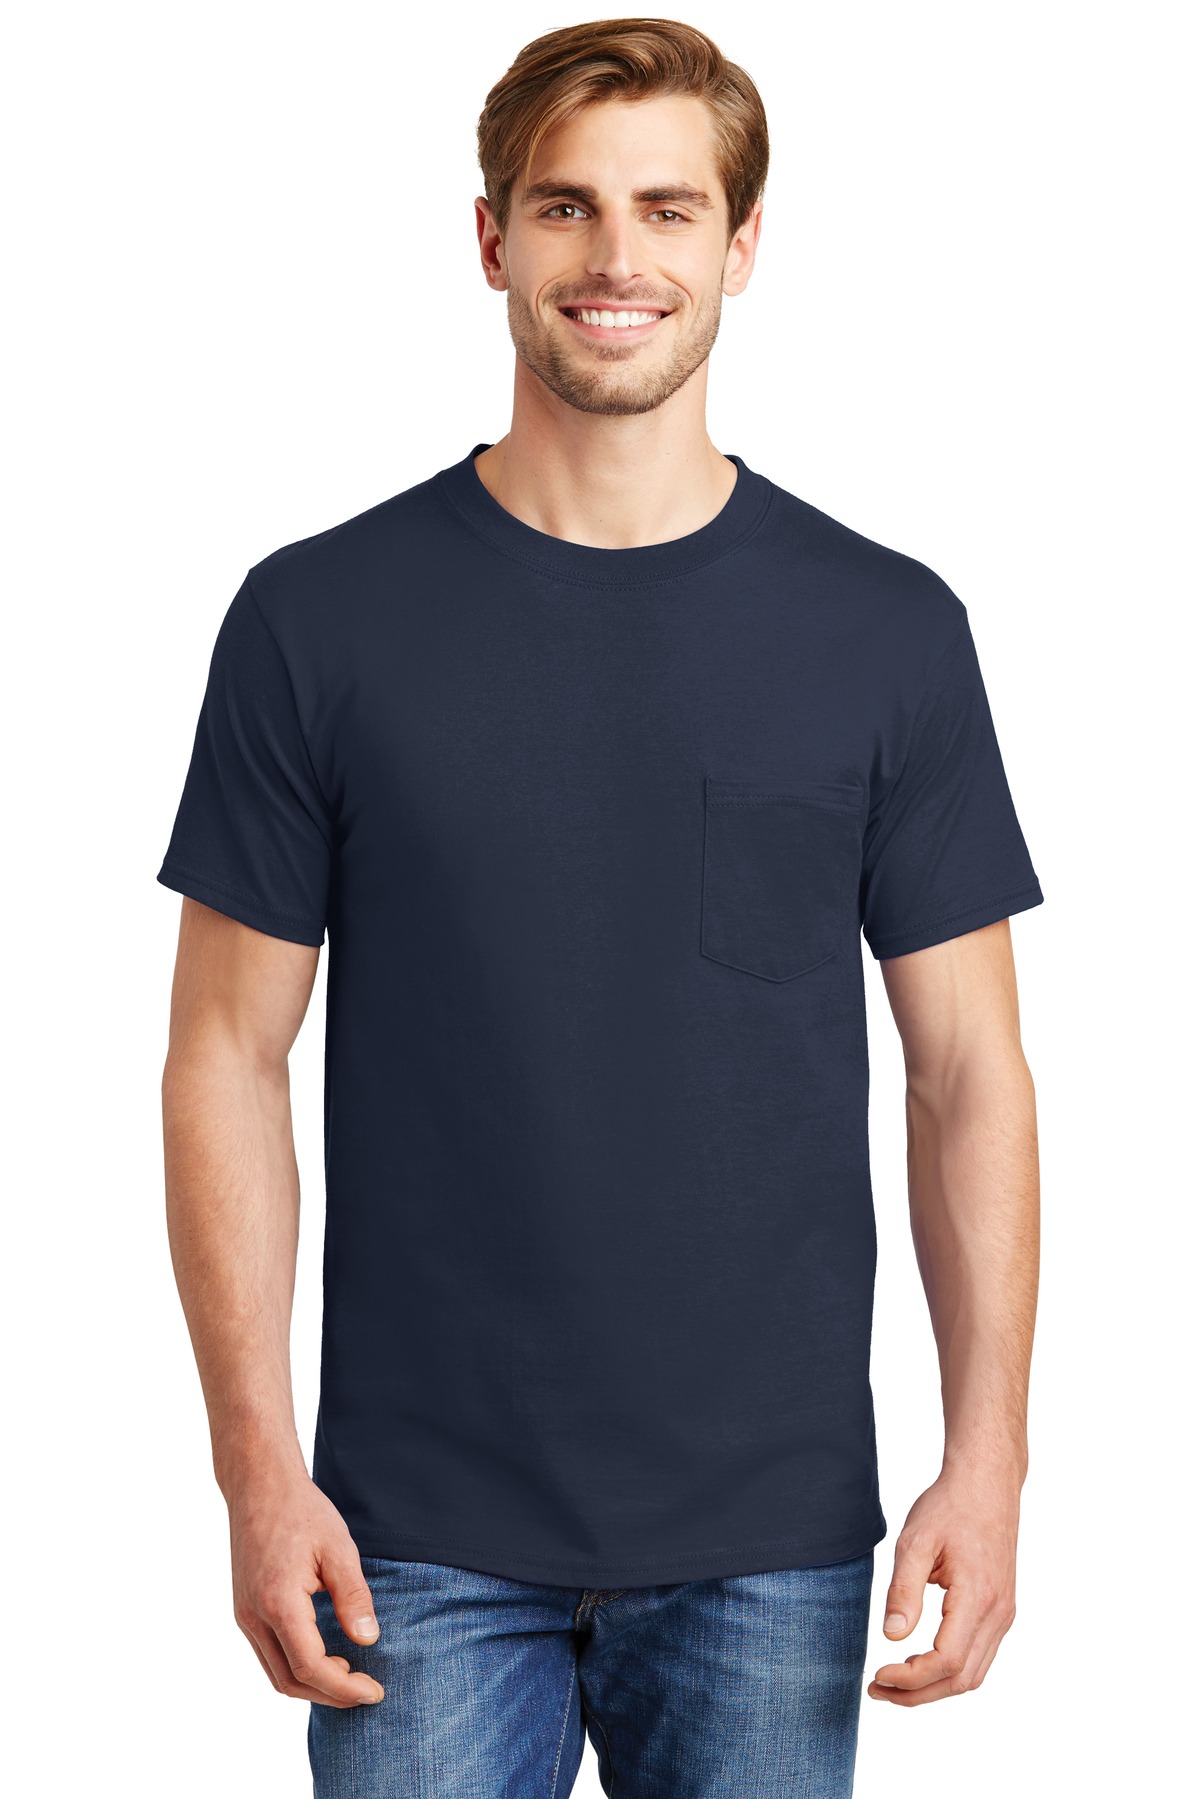 Hanes  Beefy-T  - 100% Cotton T-Shirt with Pocket. 5190